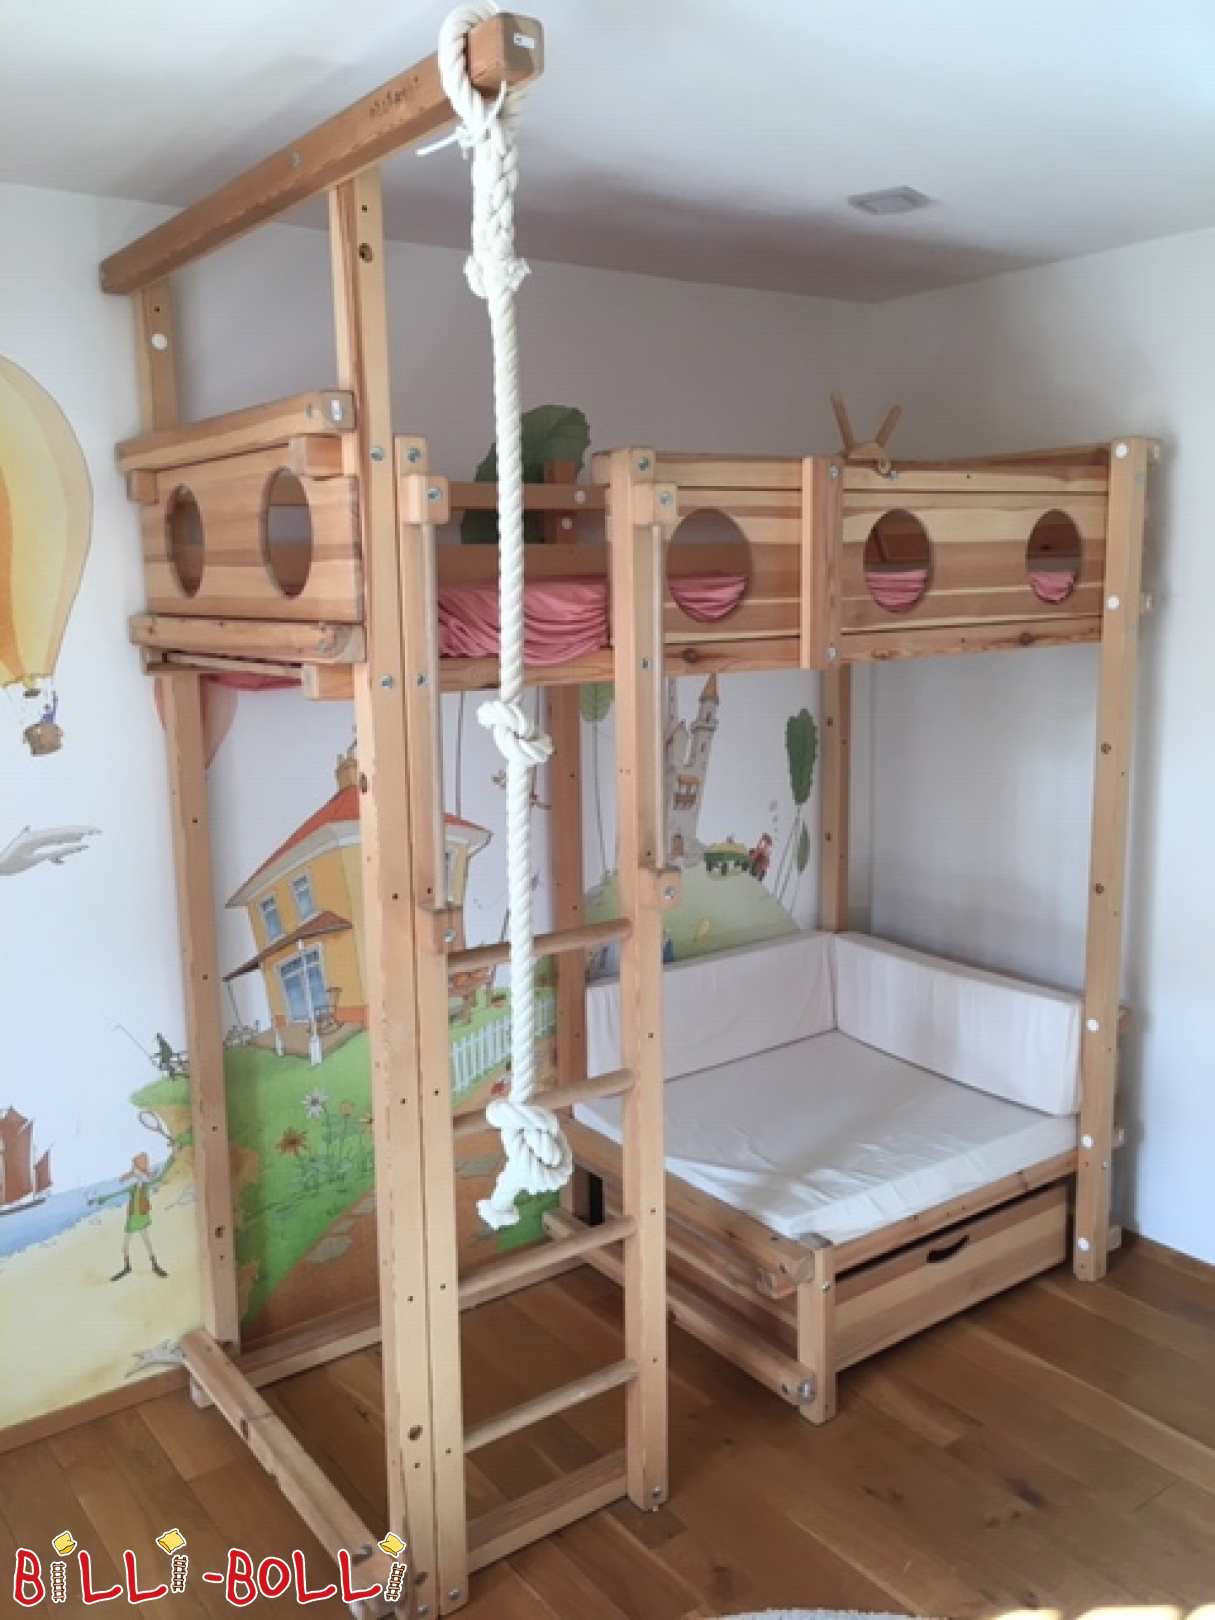 Cuddly corner bed in pine, 80 x 190 cm (Category: second hand kids’ furniture)